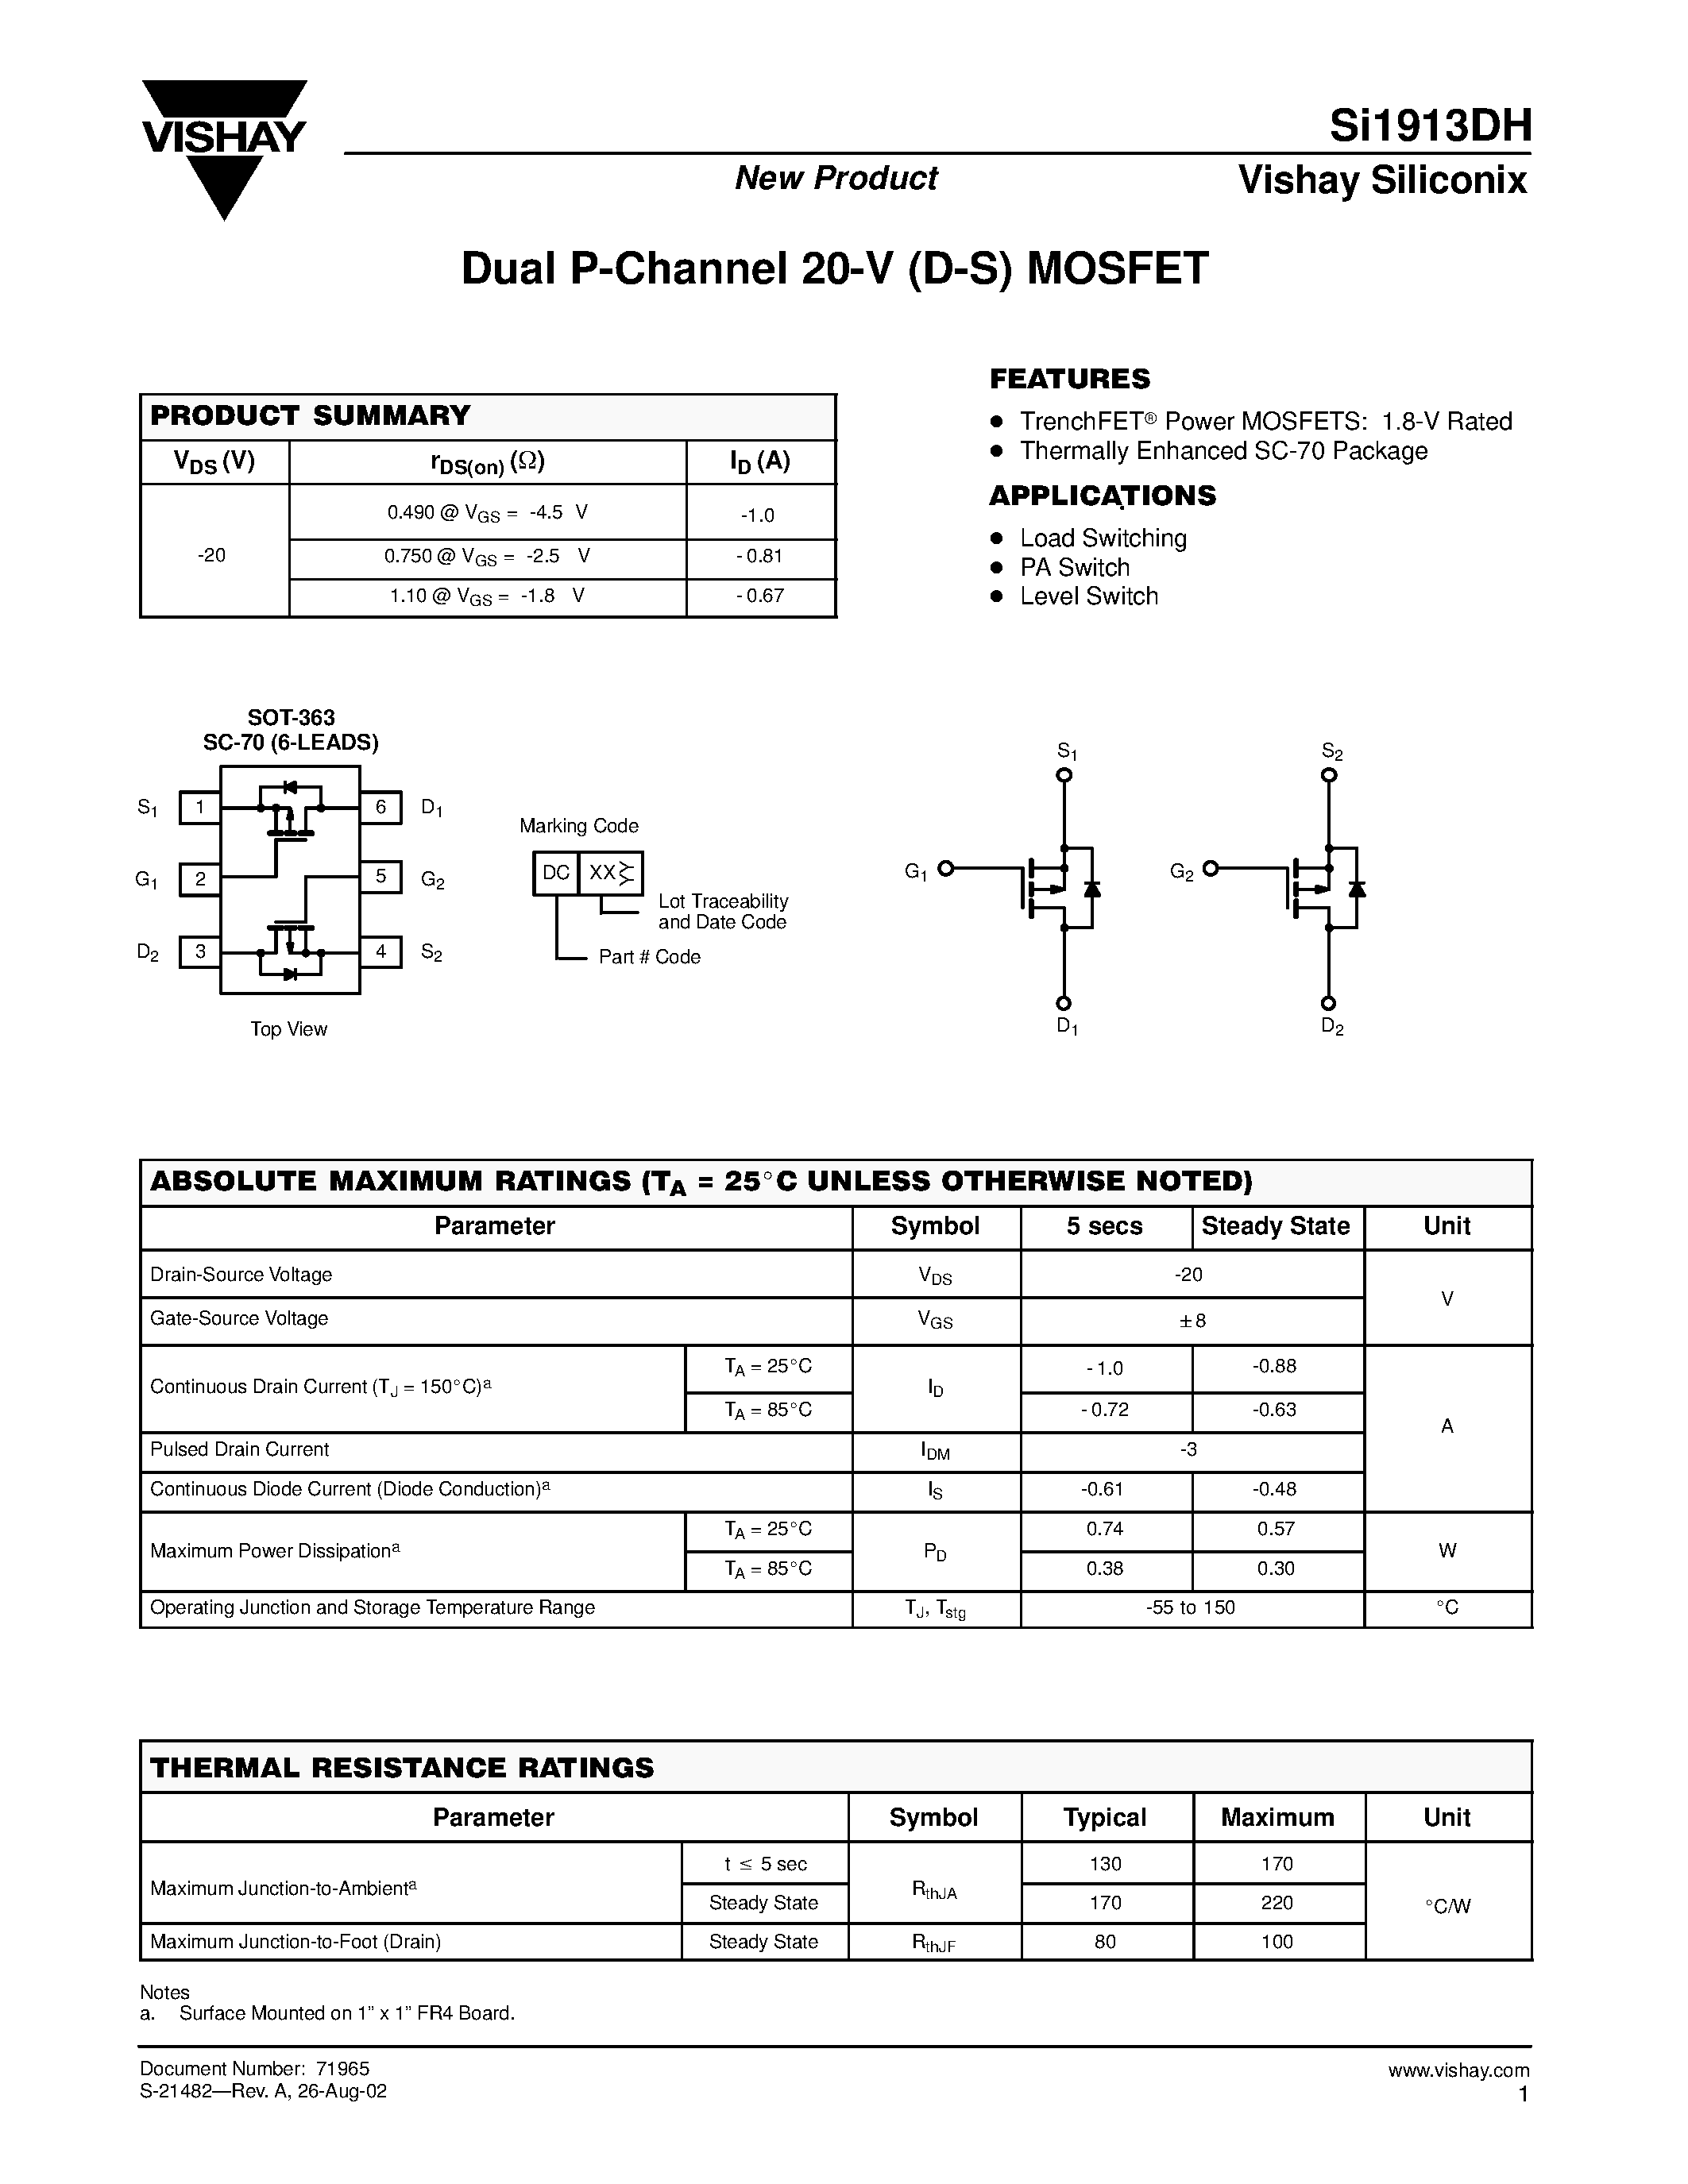 Datasheet SI1913DH - Dual P-Channel 20-V (D-S) MOSFET page 1